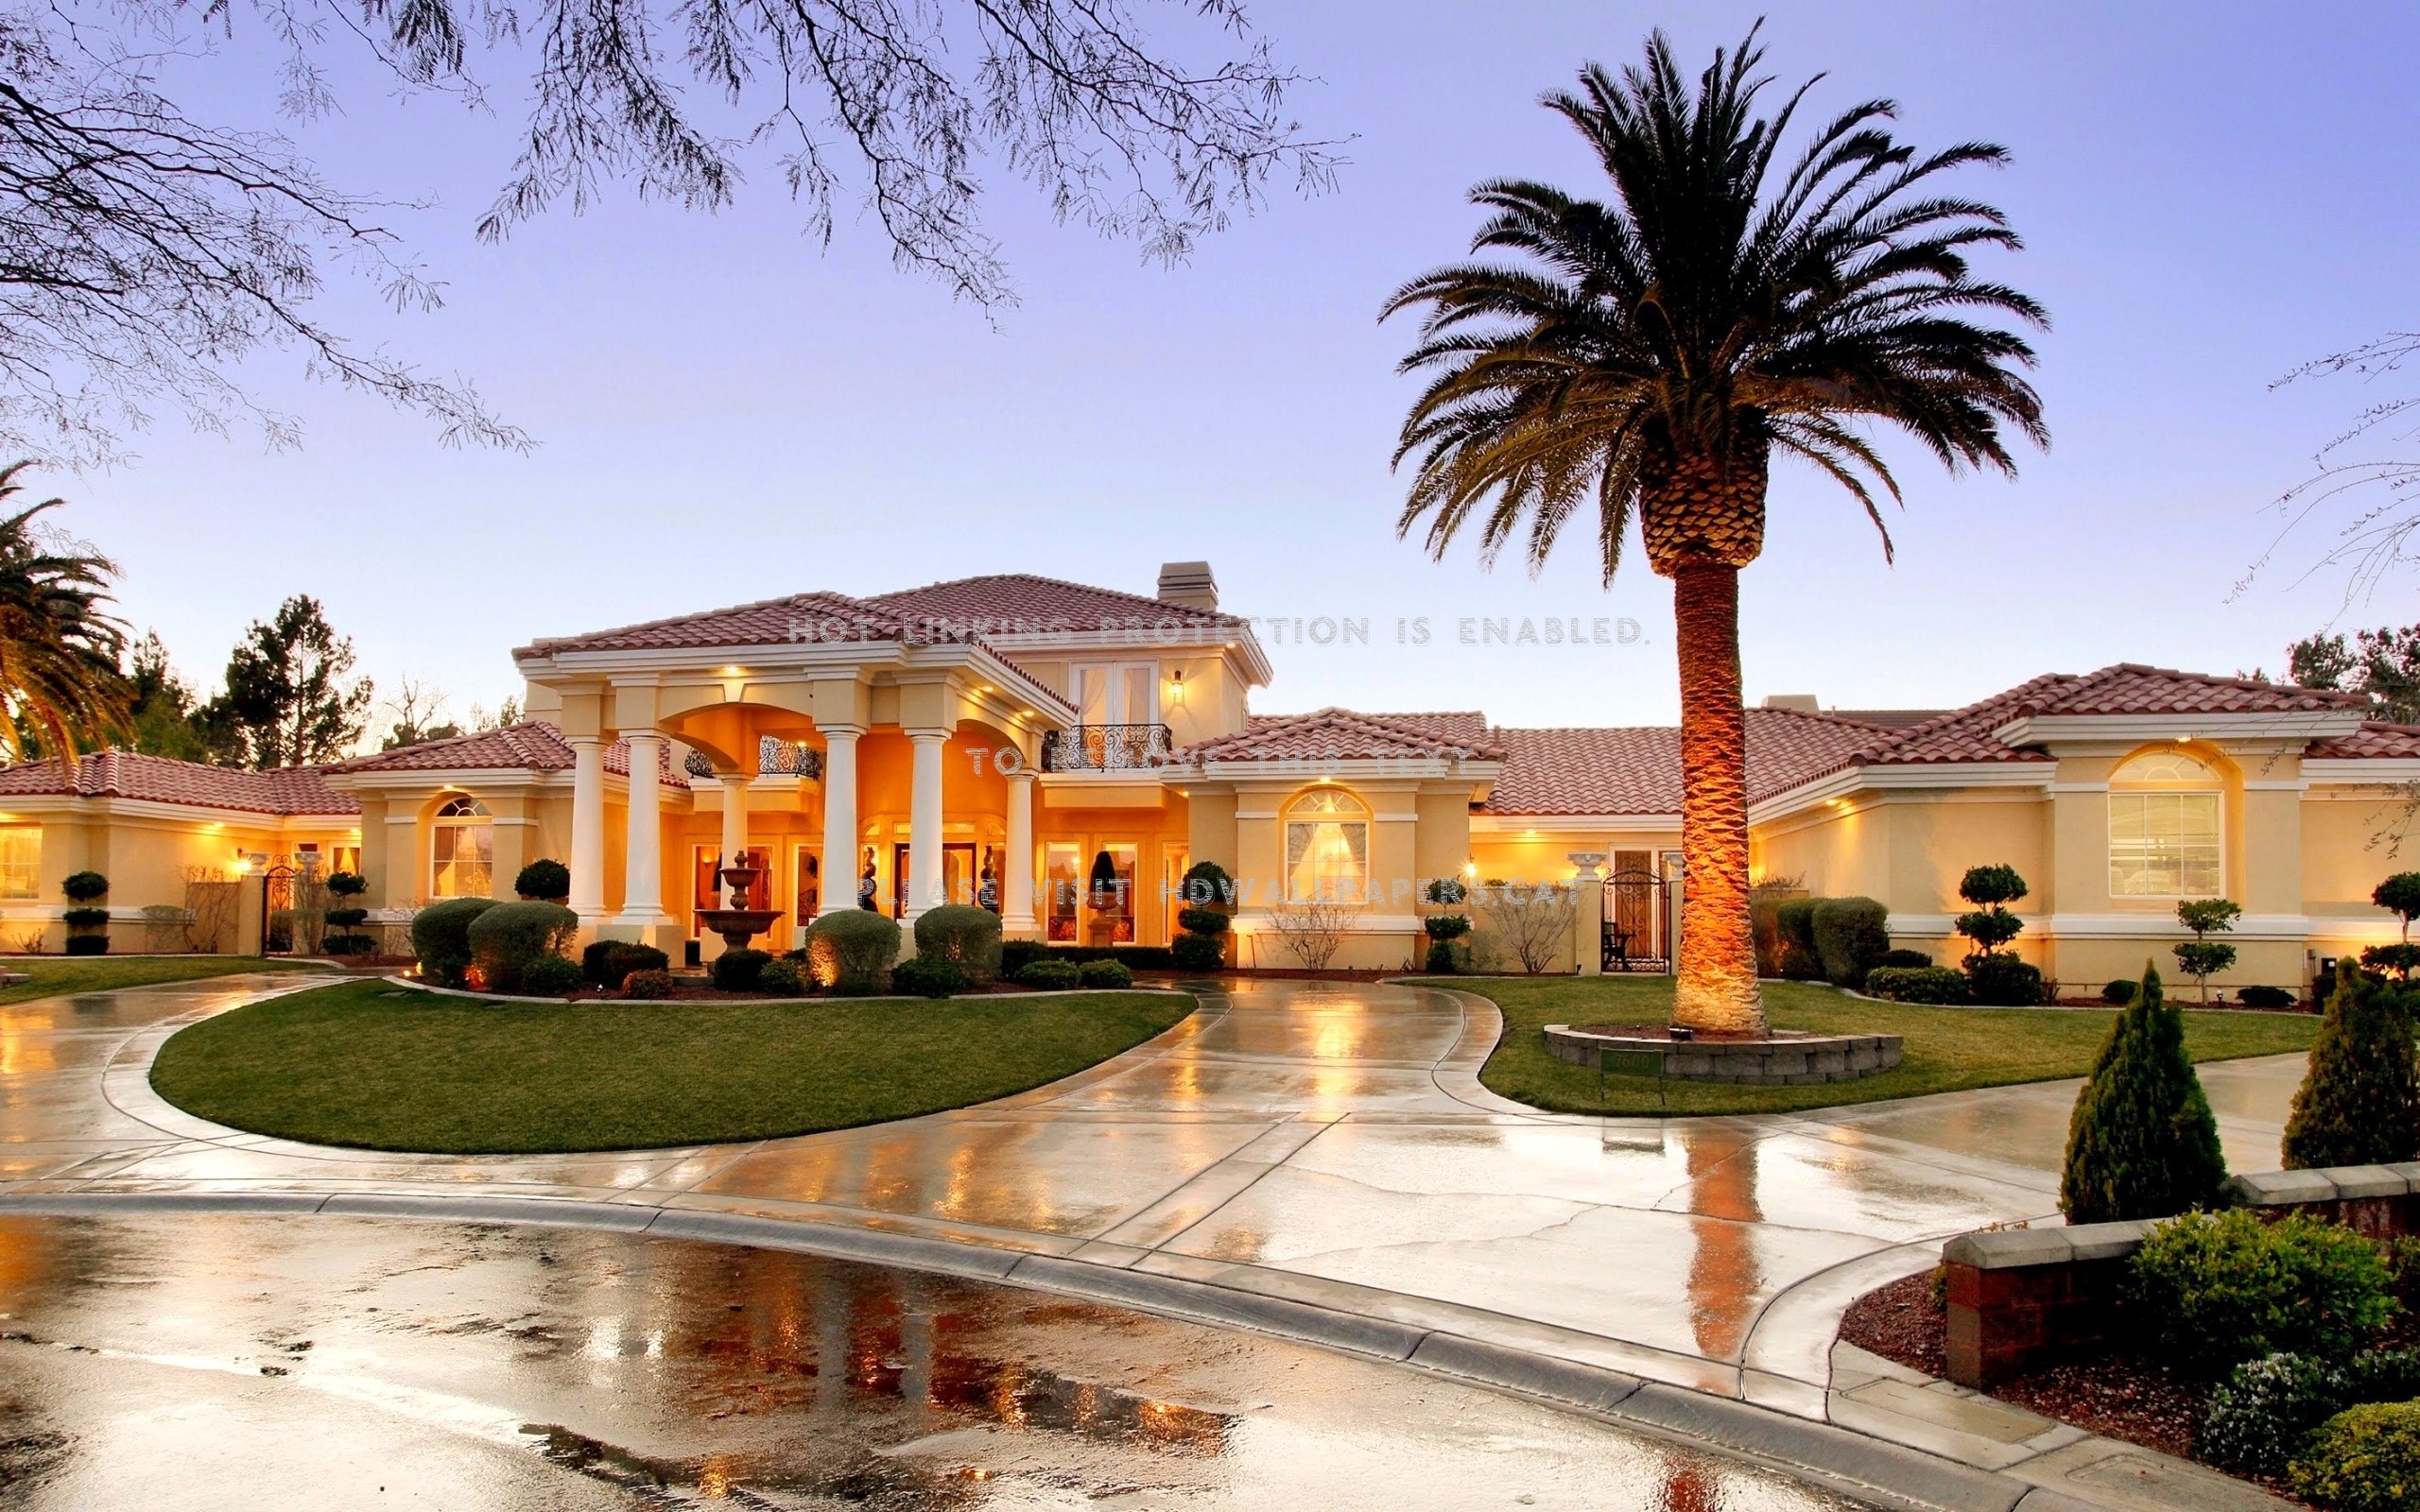 Wealth House Luxury Palm Trees Home Garden - Mansion Beautiful House In The World - HD Wallpaper 